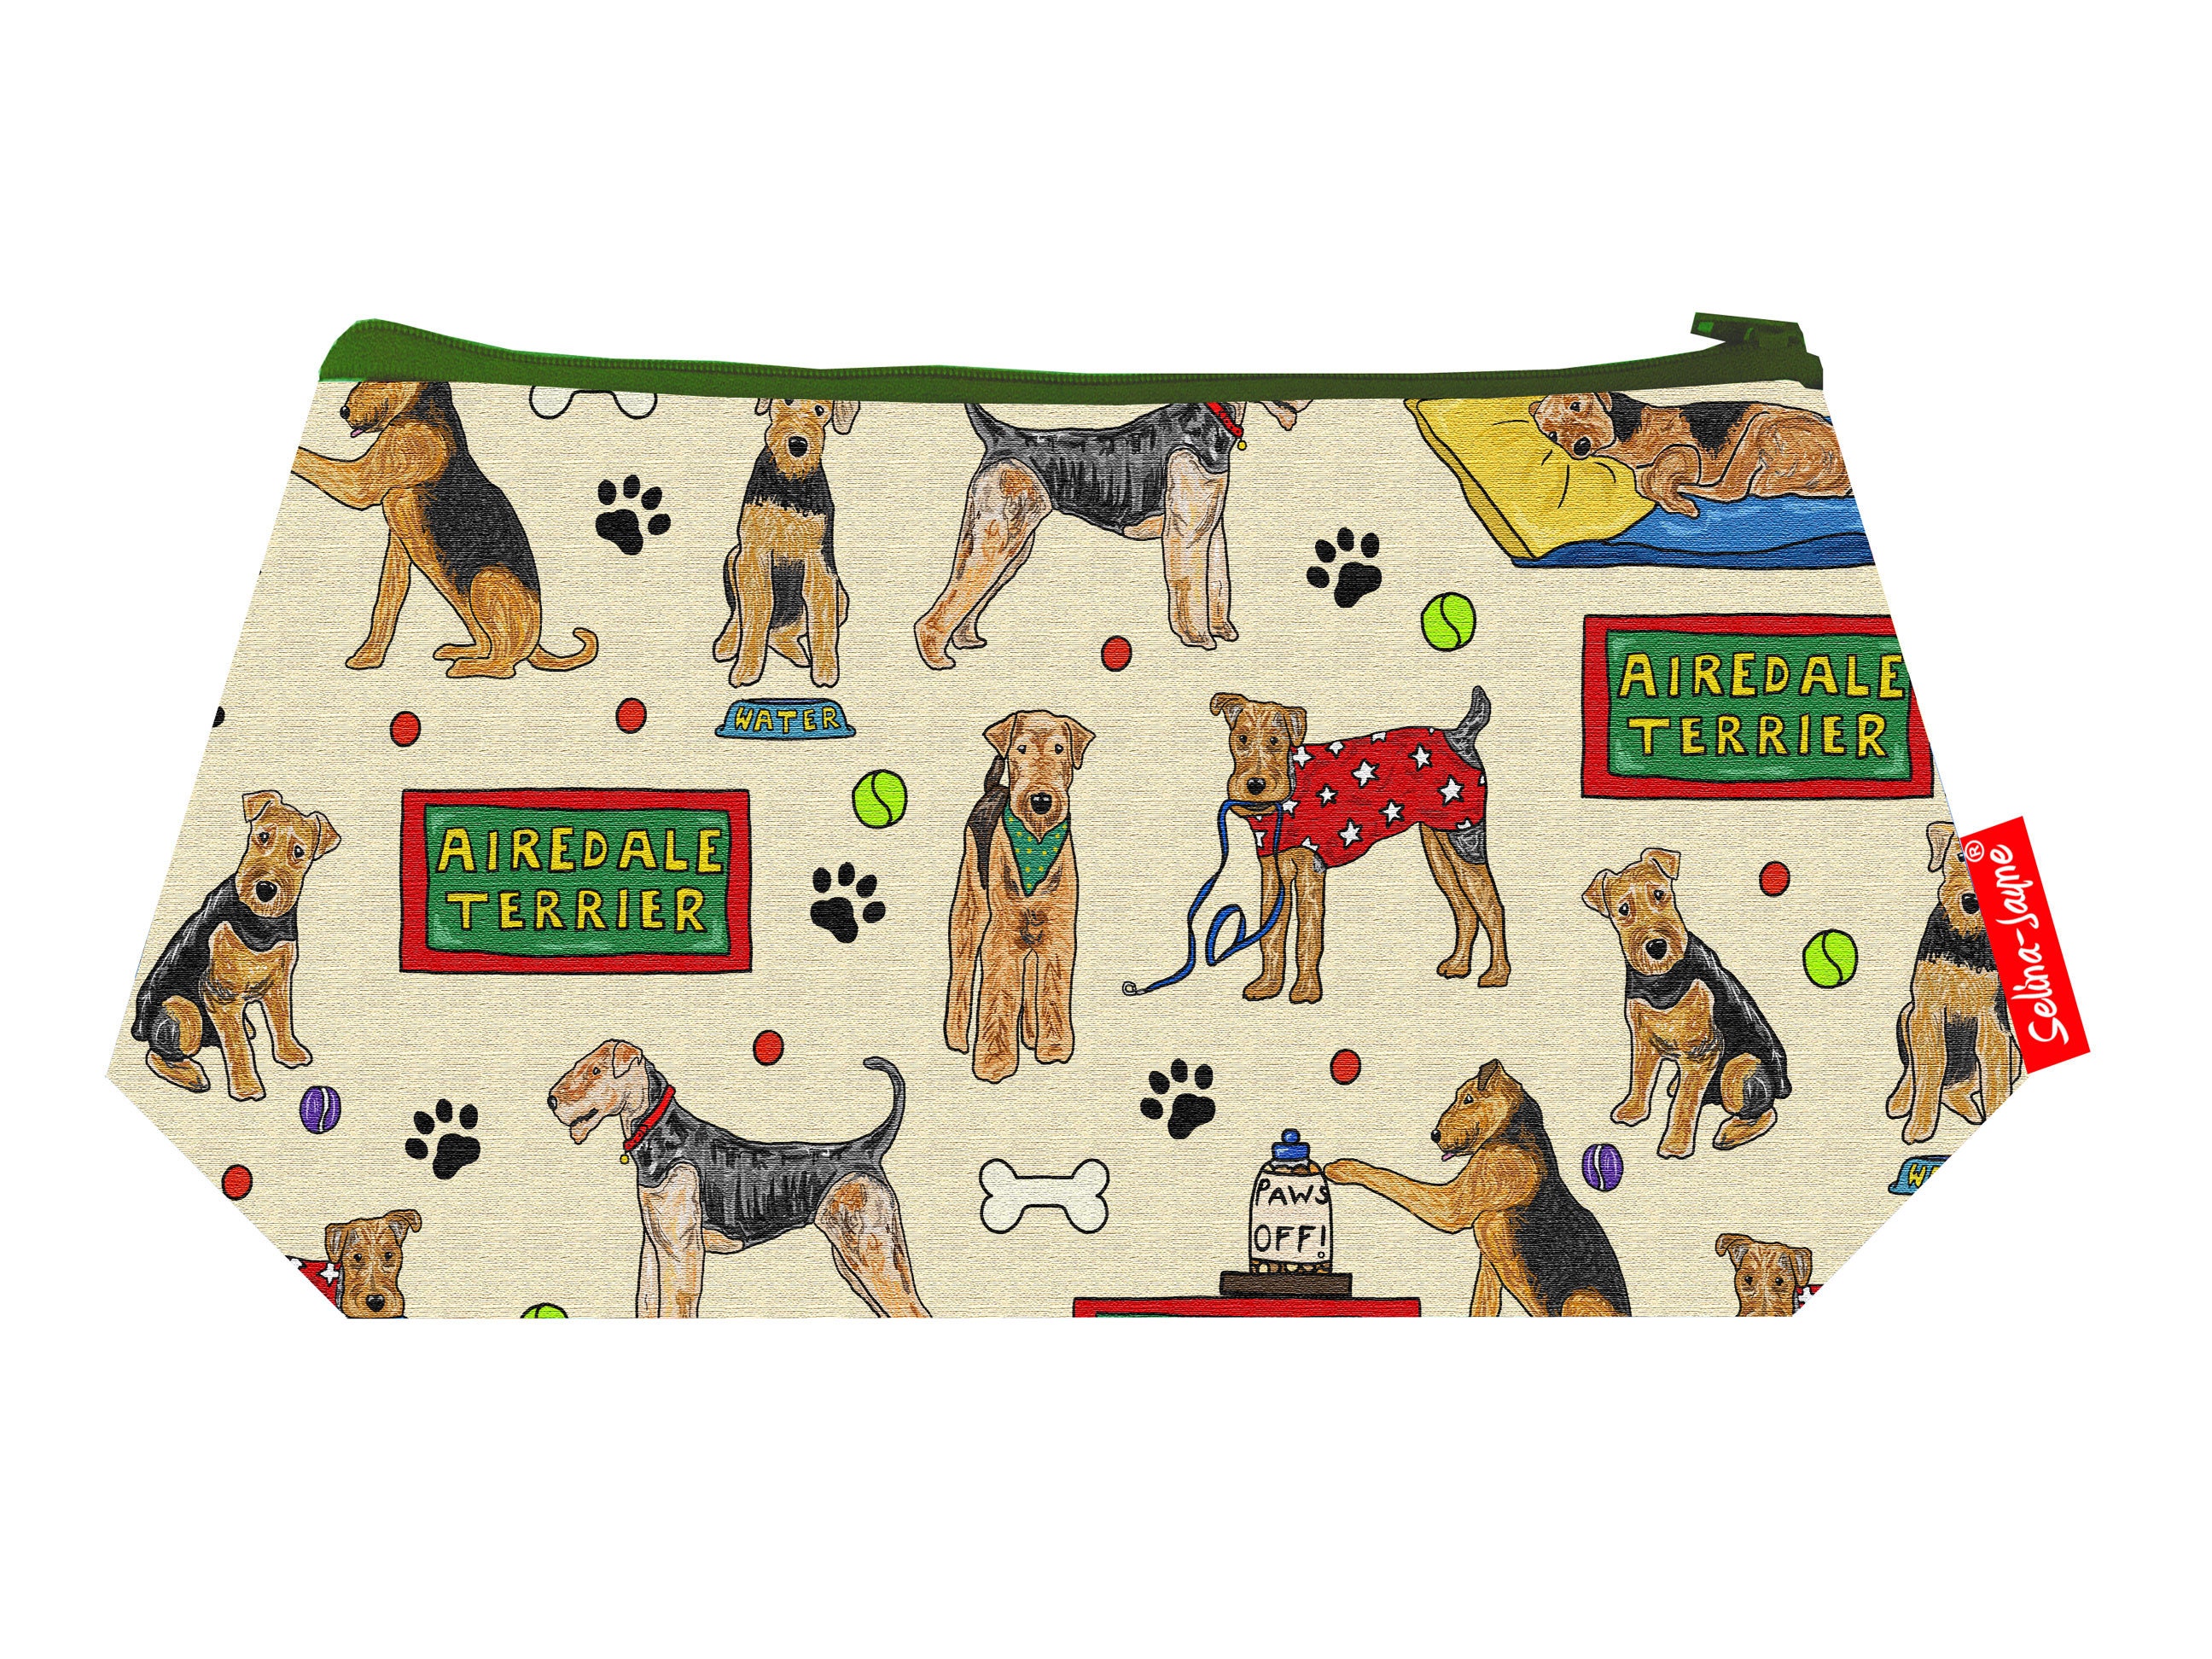 Selina-jayne Airedale Terrier Dog Small Ladies Purse Limited 